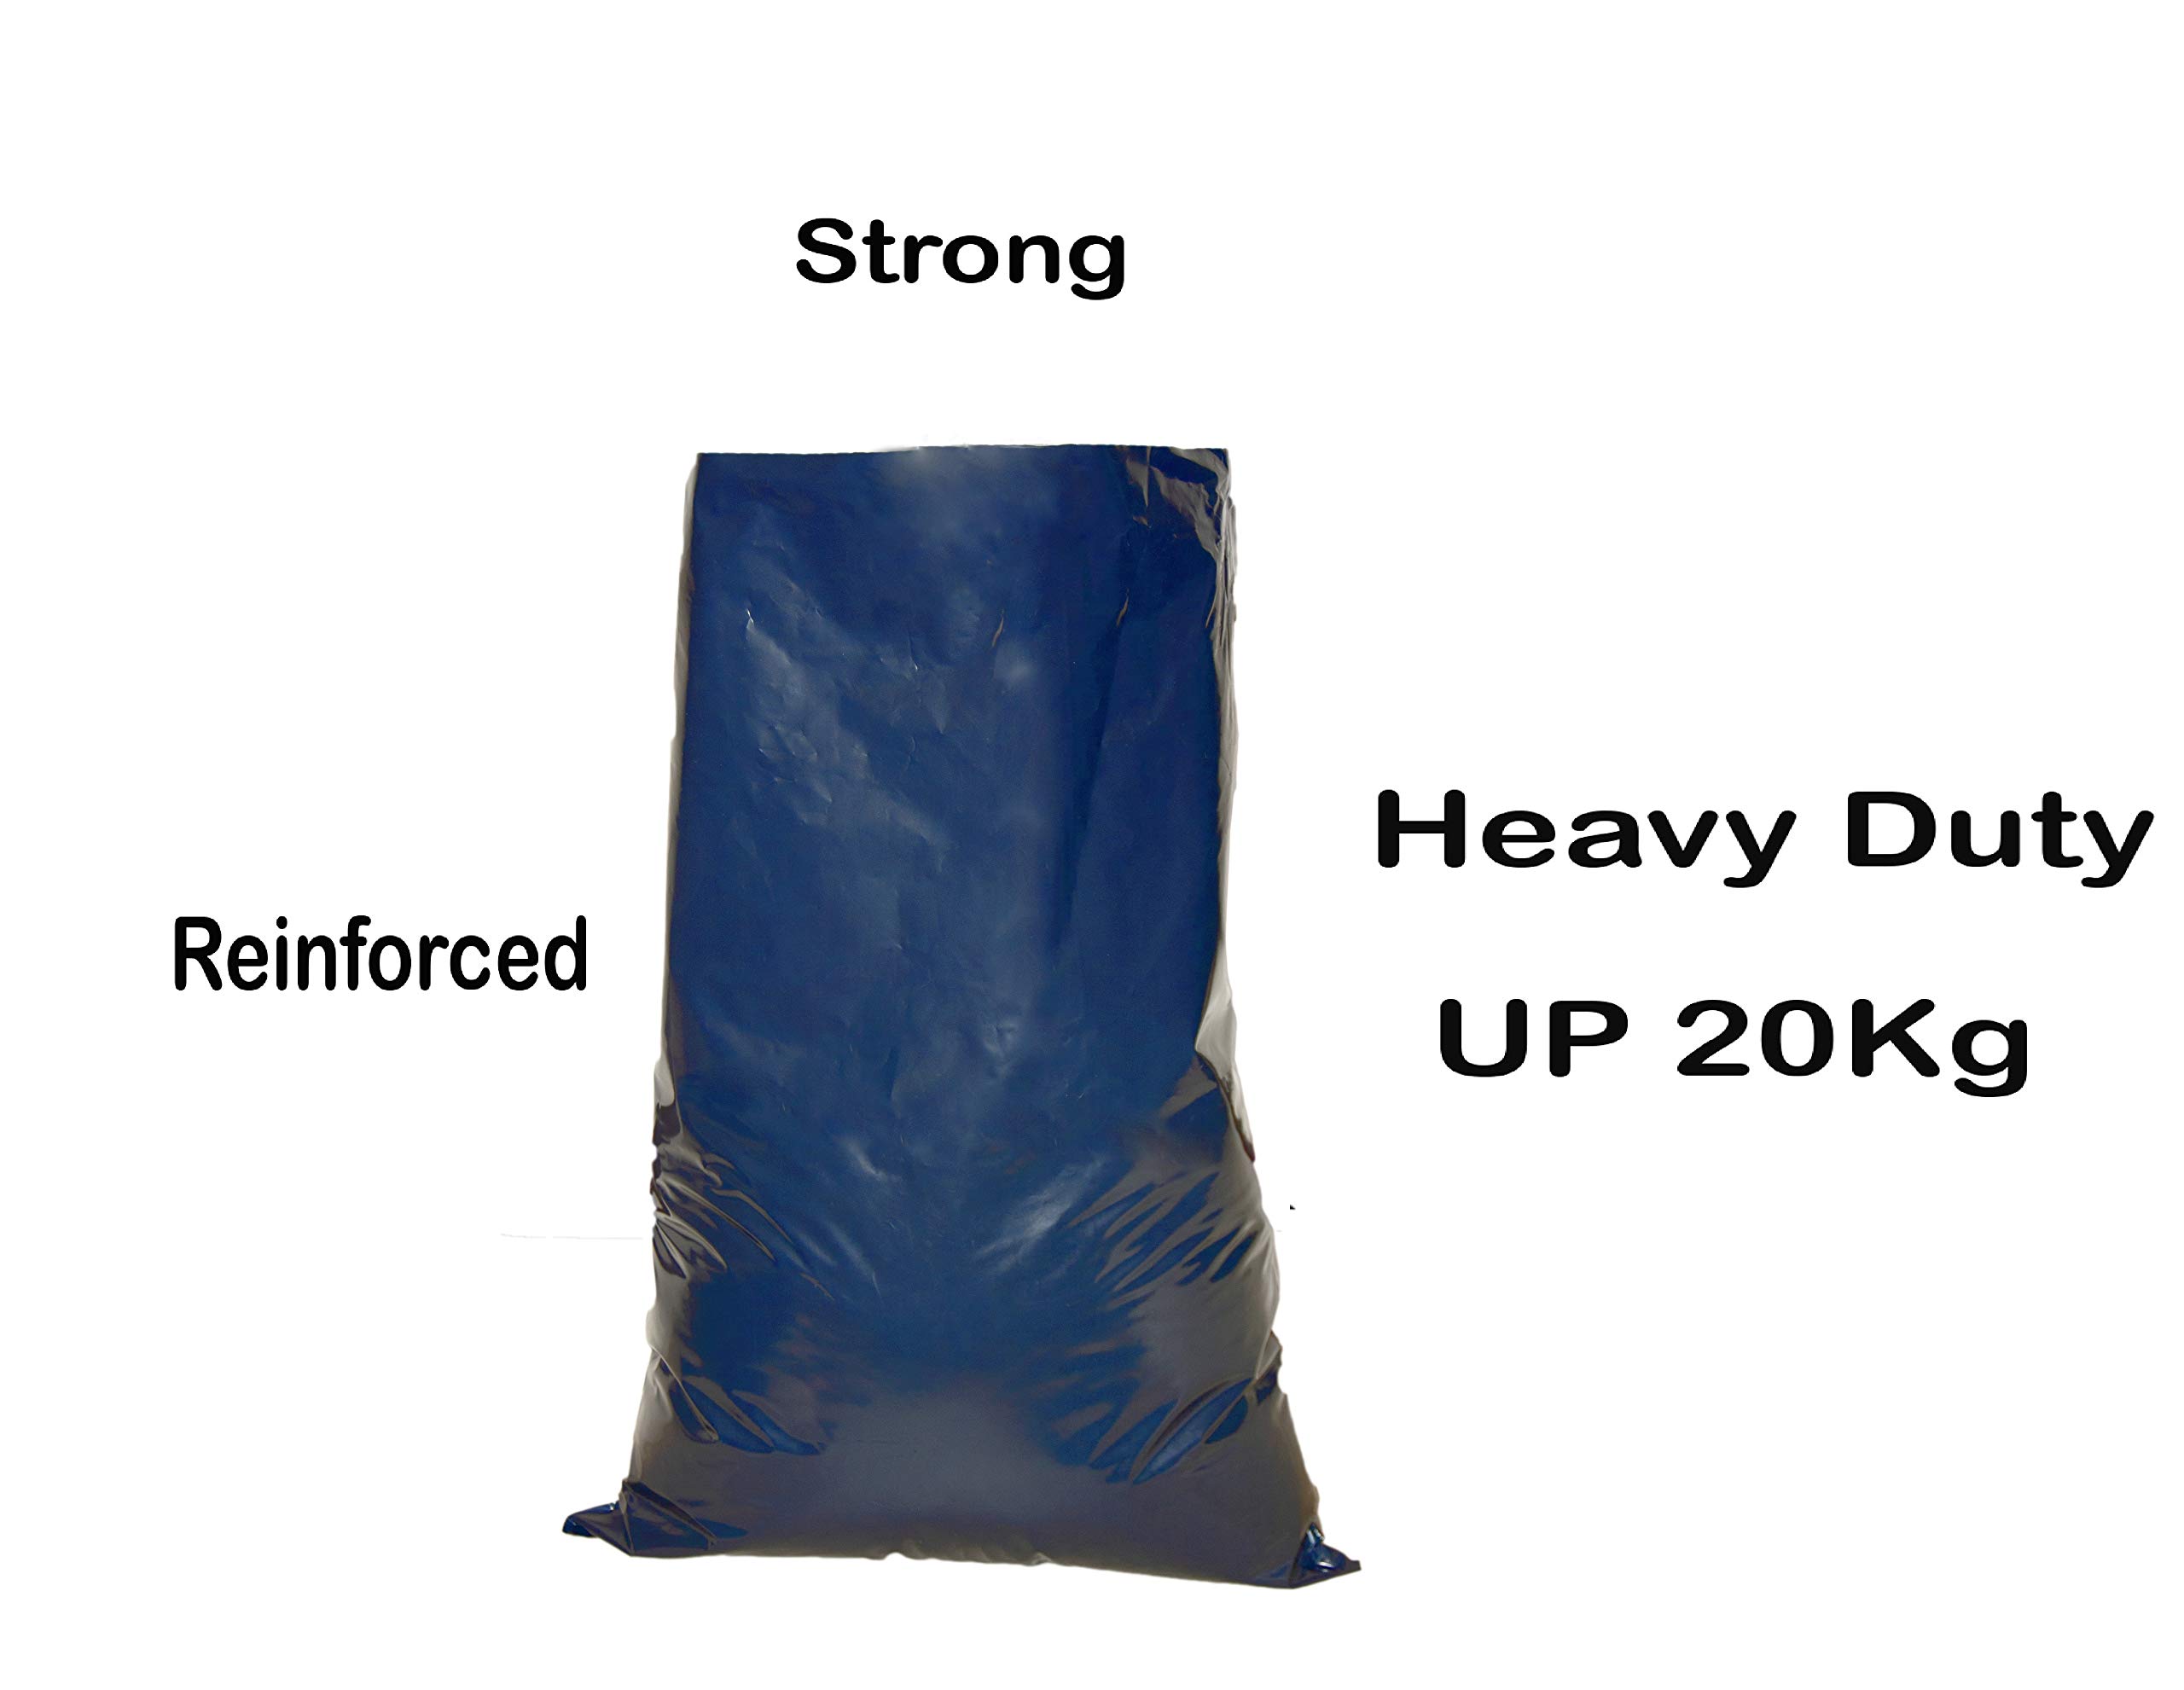 Blue Aggregate Waste Bags - 20